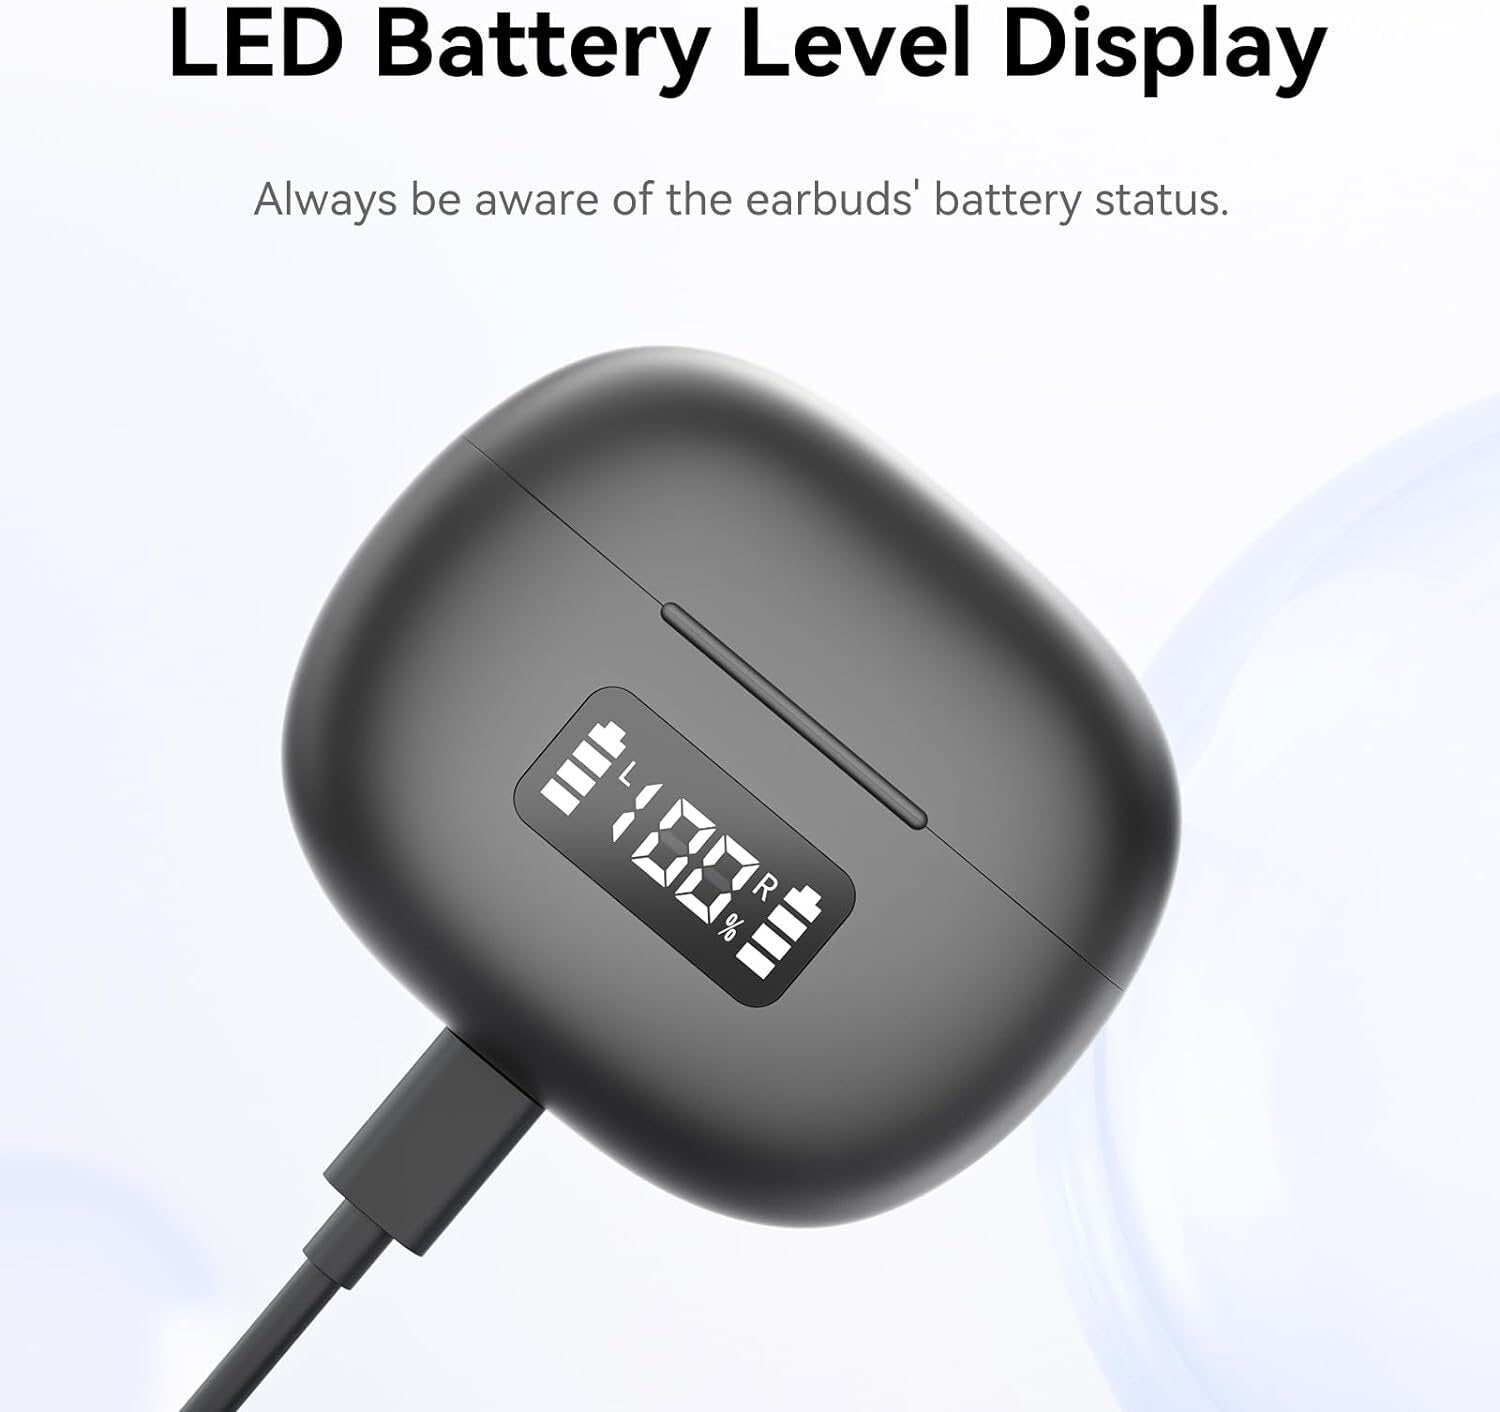 Ultra -long battery life: a single headset battery life 8H, with a charging compartment for 37H